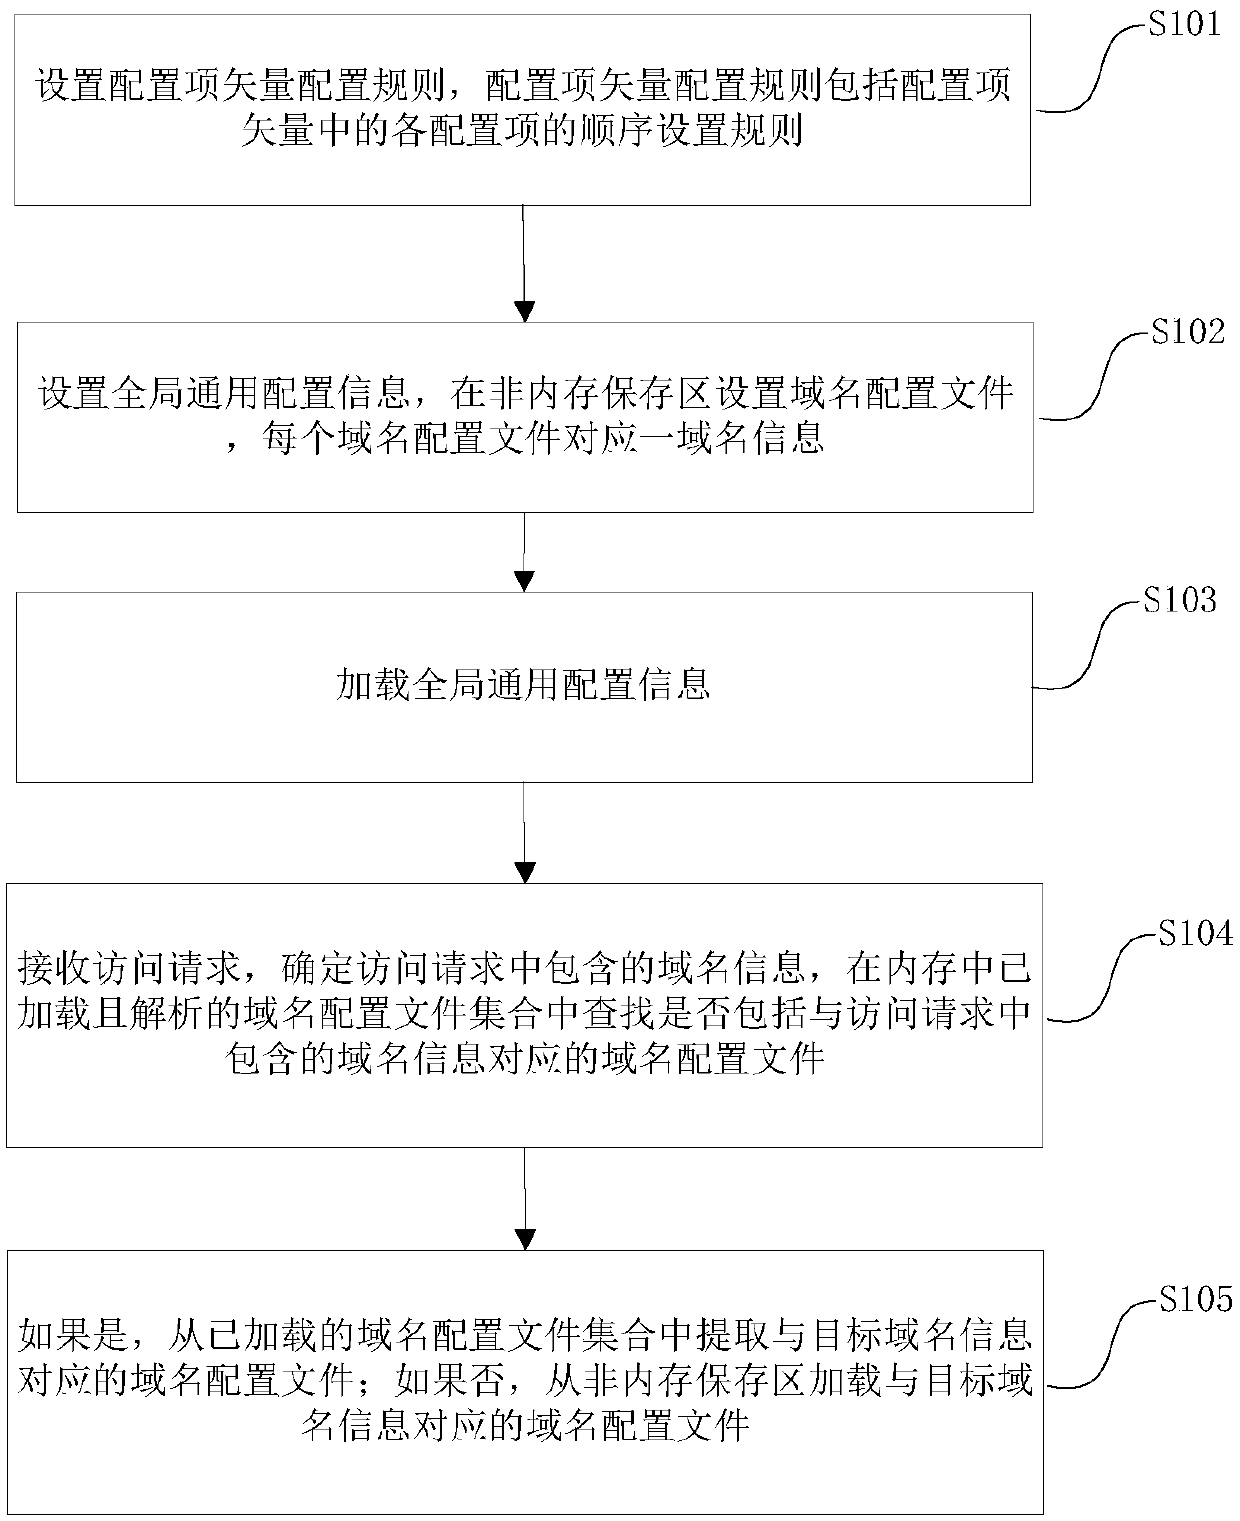 Domain name configuration information processing method and device